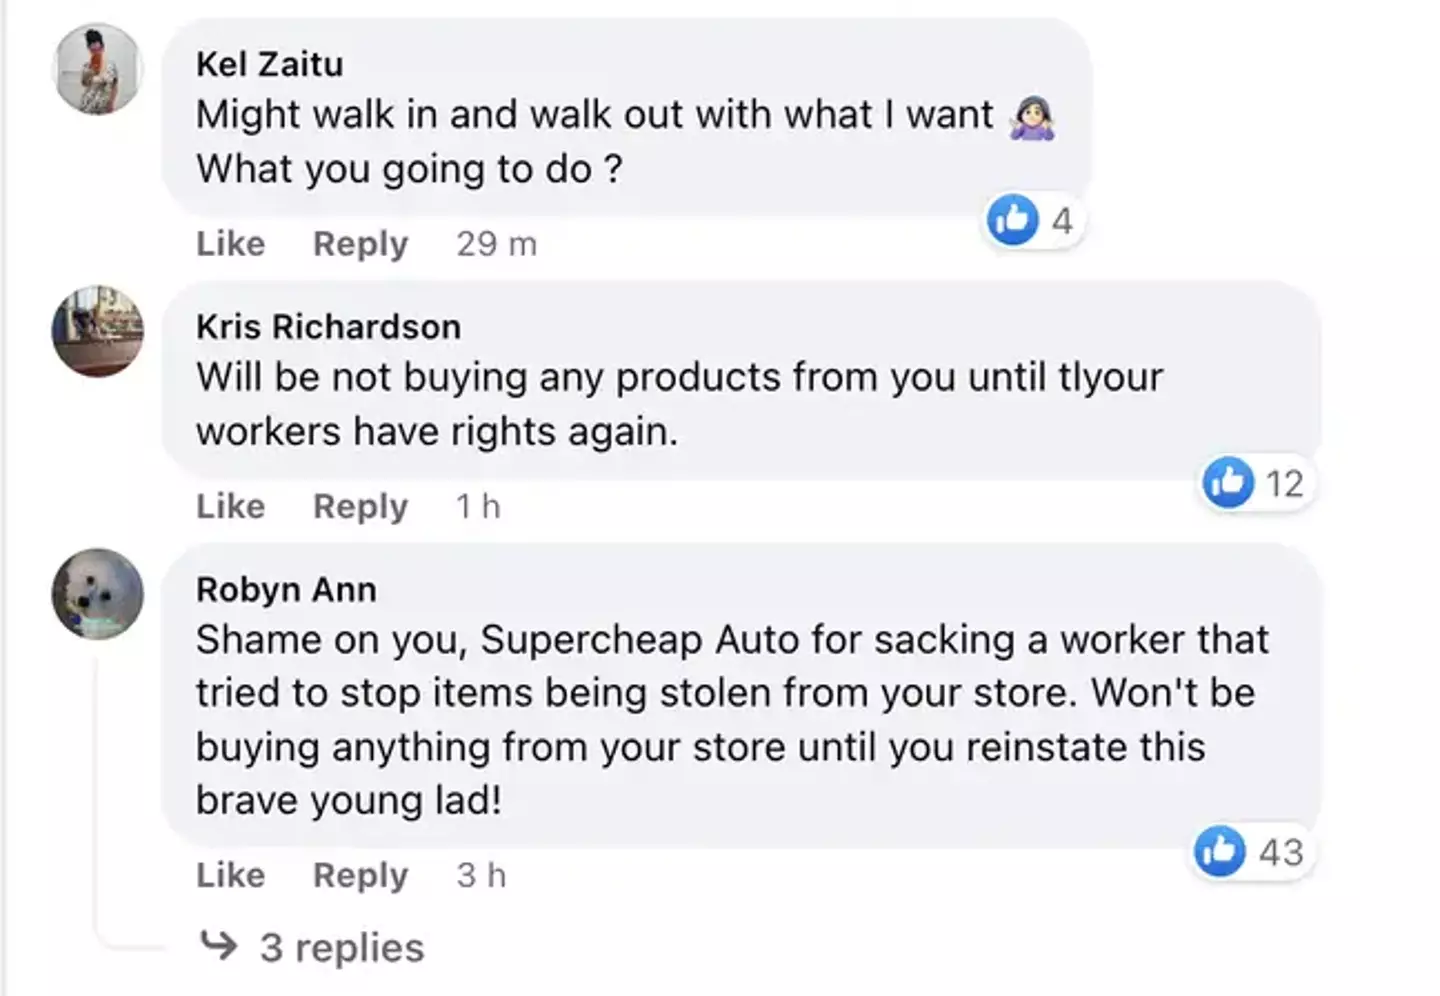 Numerous social media users criticised Supercheap Auto over the incident.